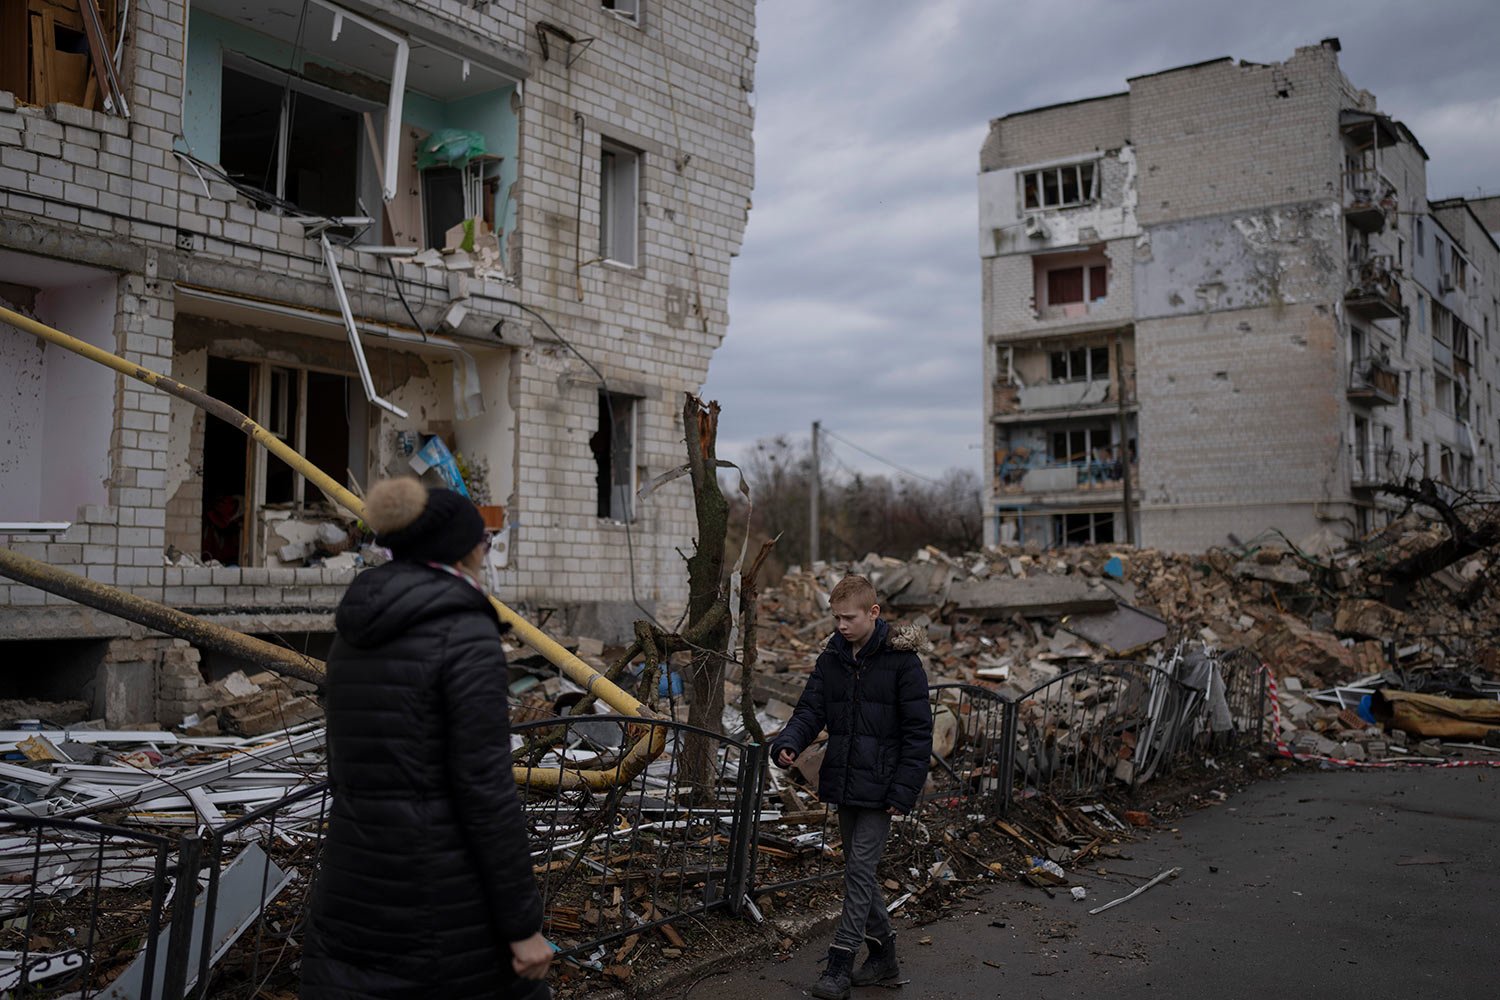  A boy is searching for his cat as he walks outside a destroyed apartment building in the town of Borodyanka, Ukraine, on Saturday, April 9, 2022. (AP Photo/Petros Giannakouris) 